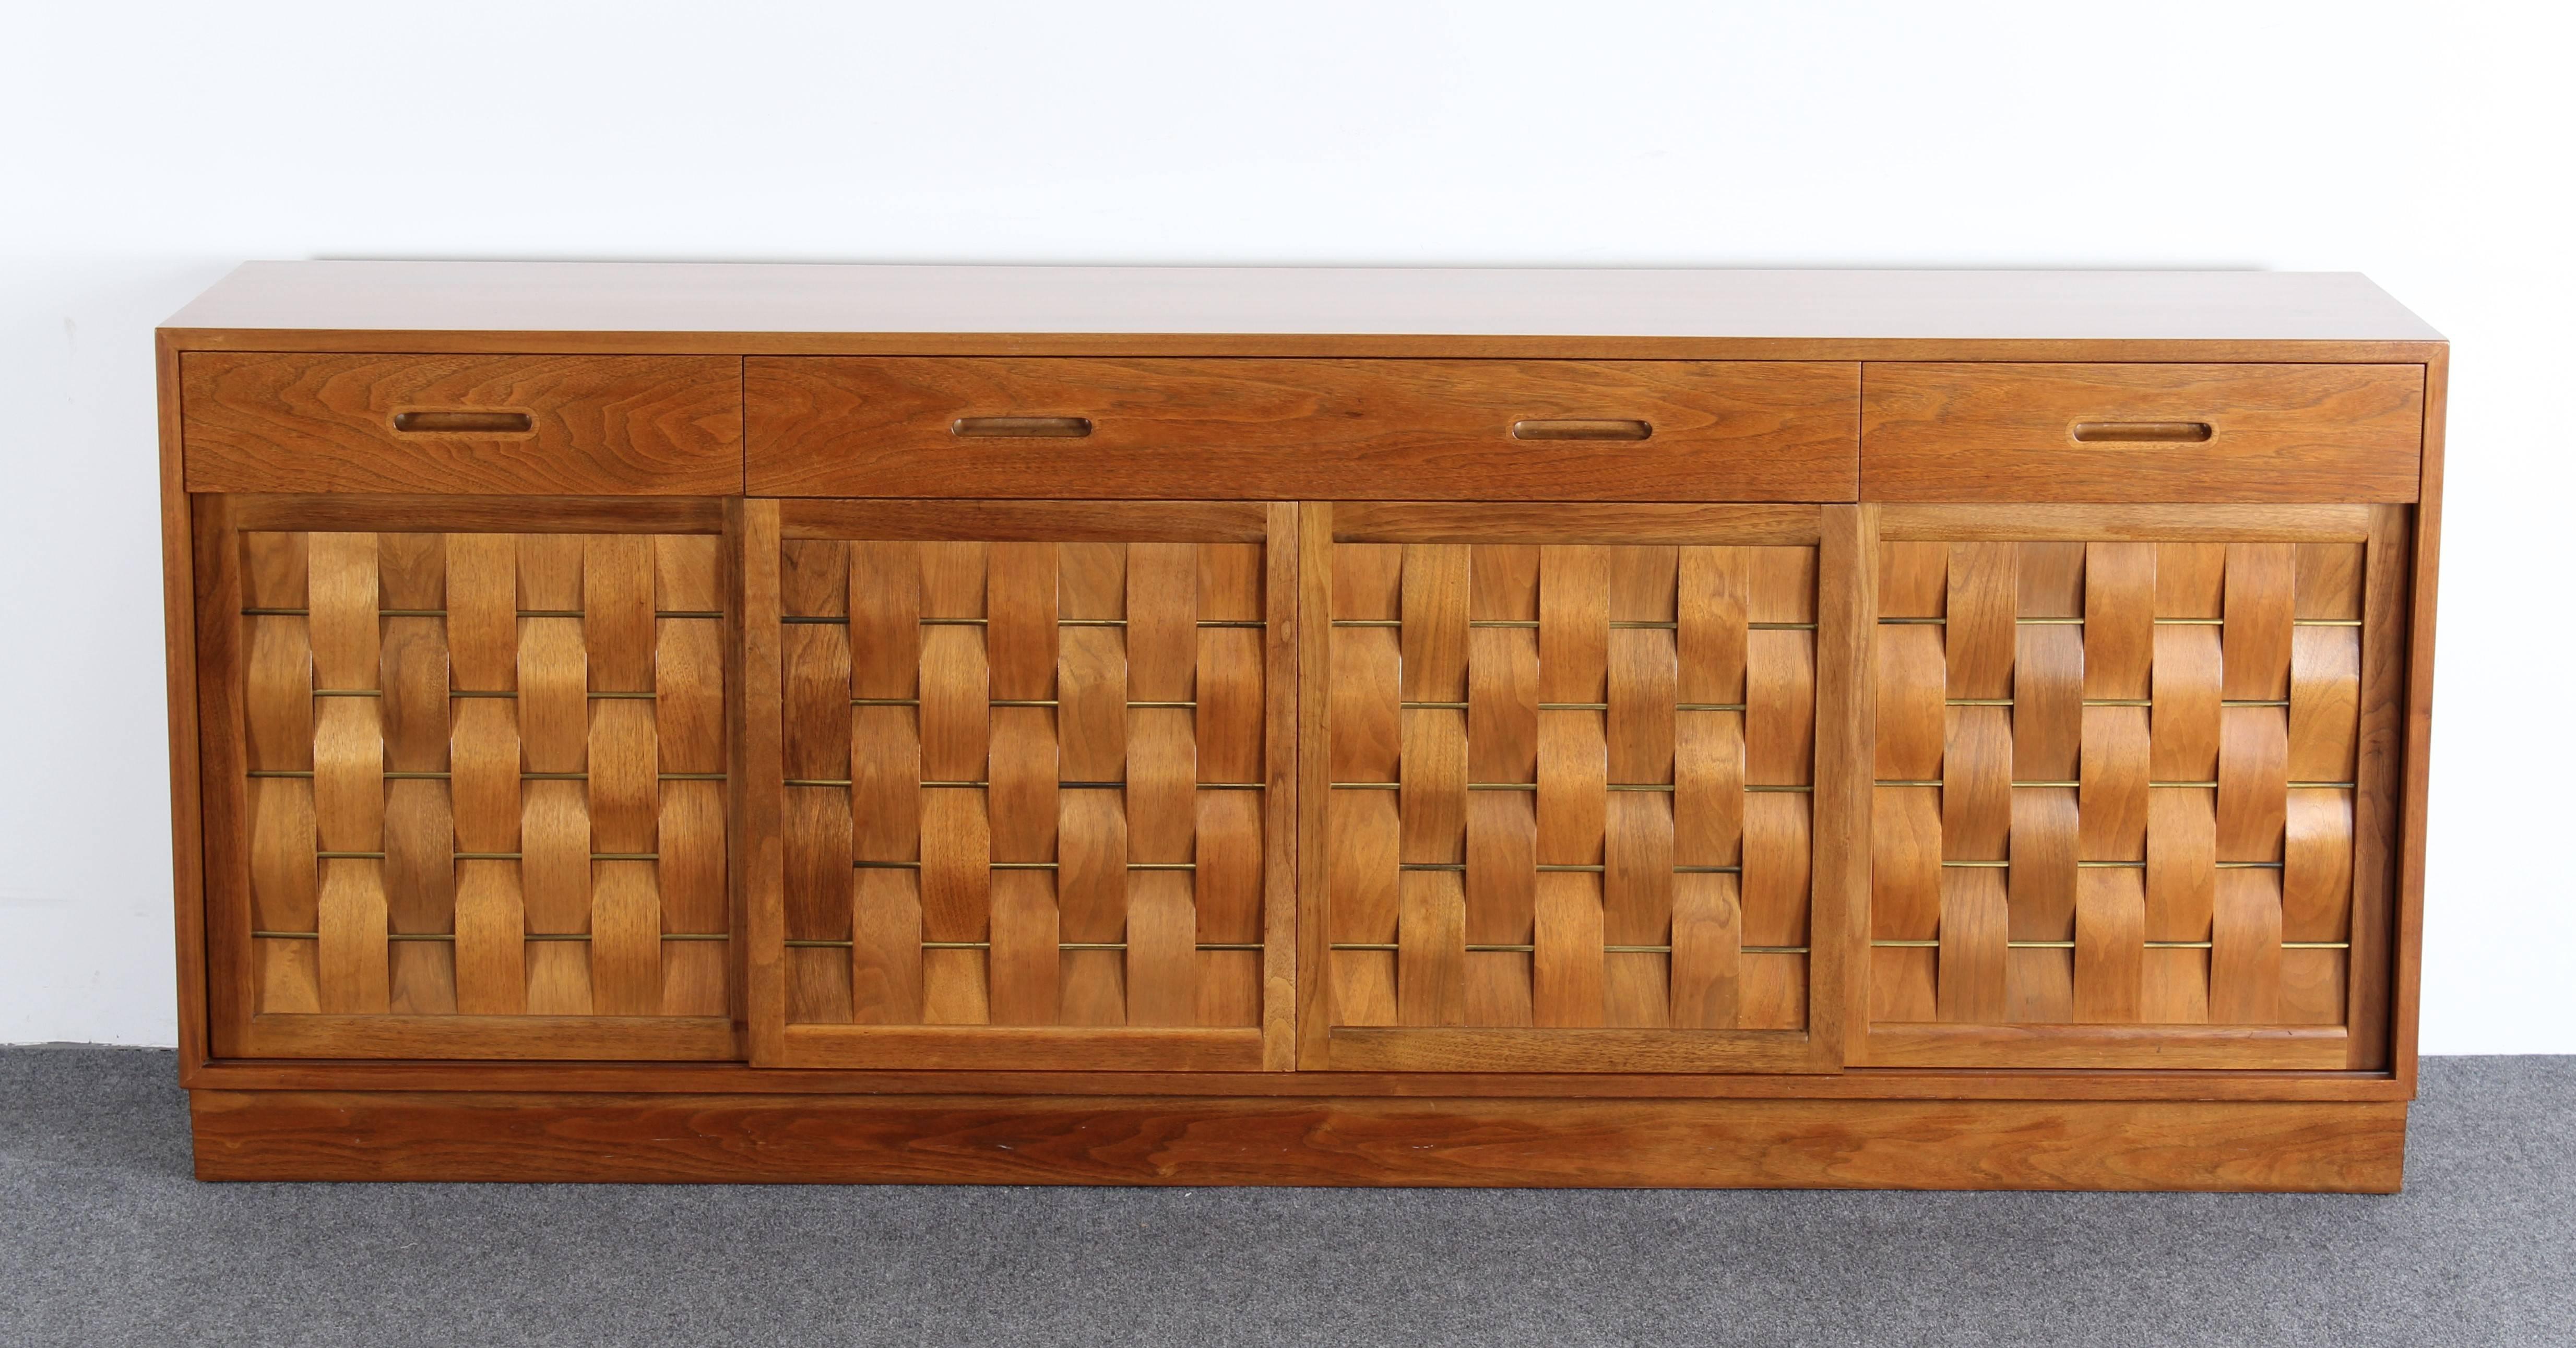 A stunning four door and four drawer woven front cabinet or credenza with brass accents designed by Edward Wormley for Dunbar.